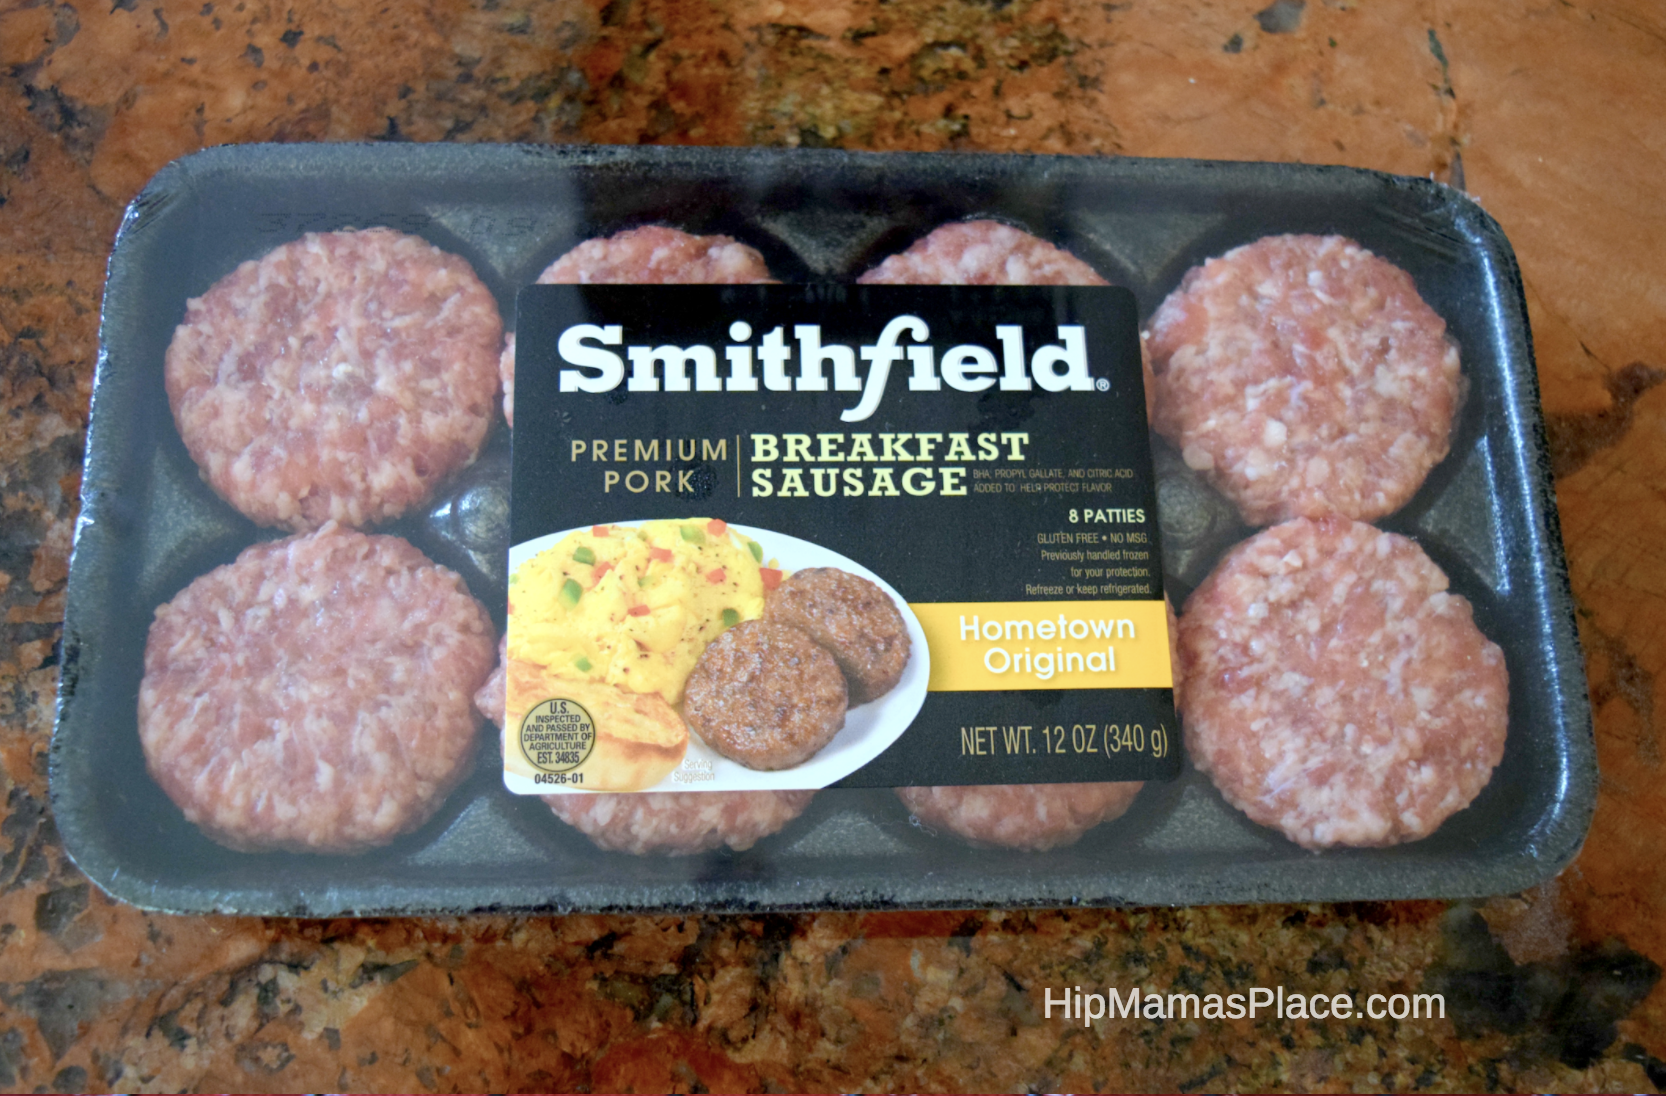 Smithfield’s line of Fresh Breakfast Sausage is made of premium, high-quality pork, and are gluten free and contain no MSG. 